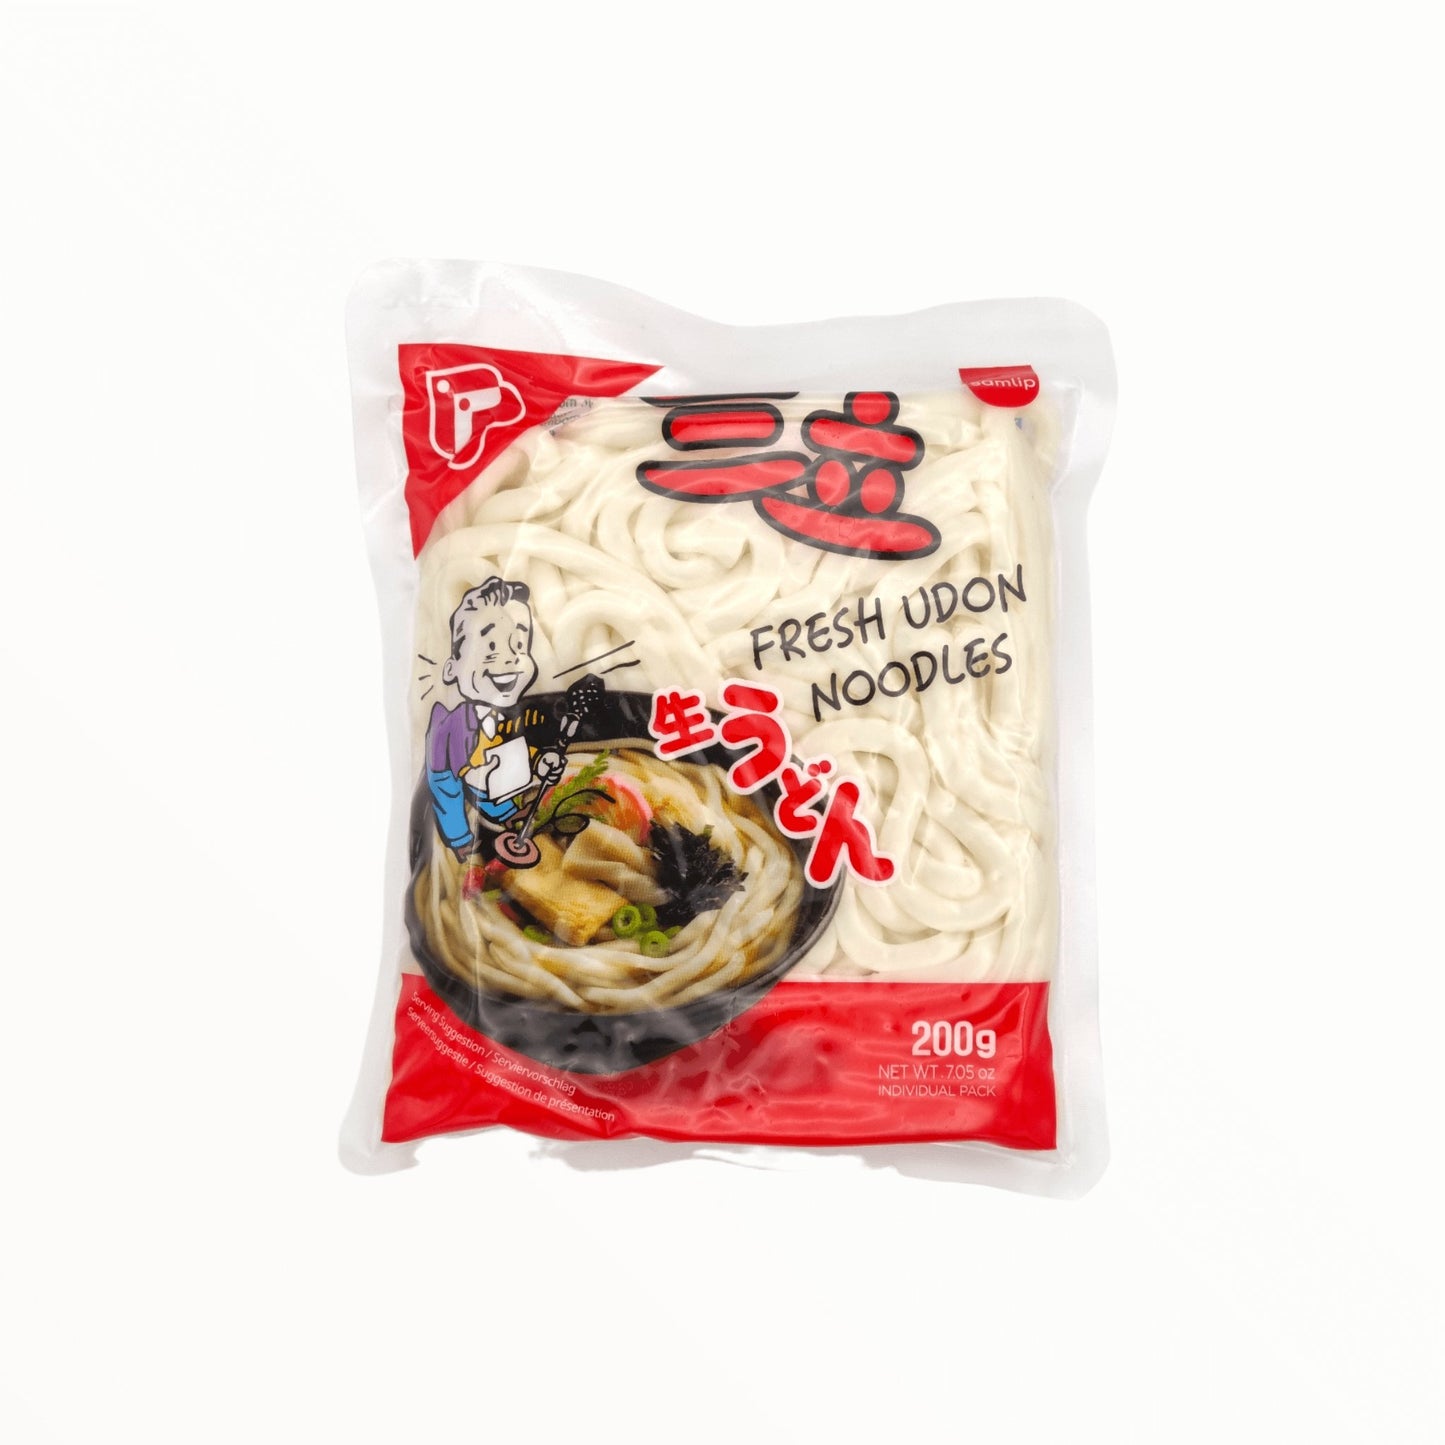 Frische Udon-Nudeln 200g - Mabuhay Pinoy Asia Shop